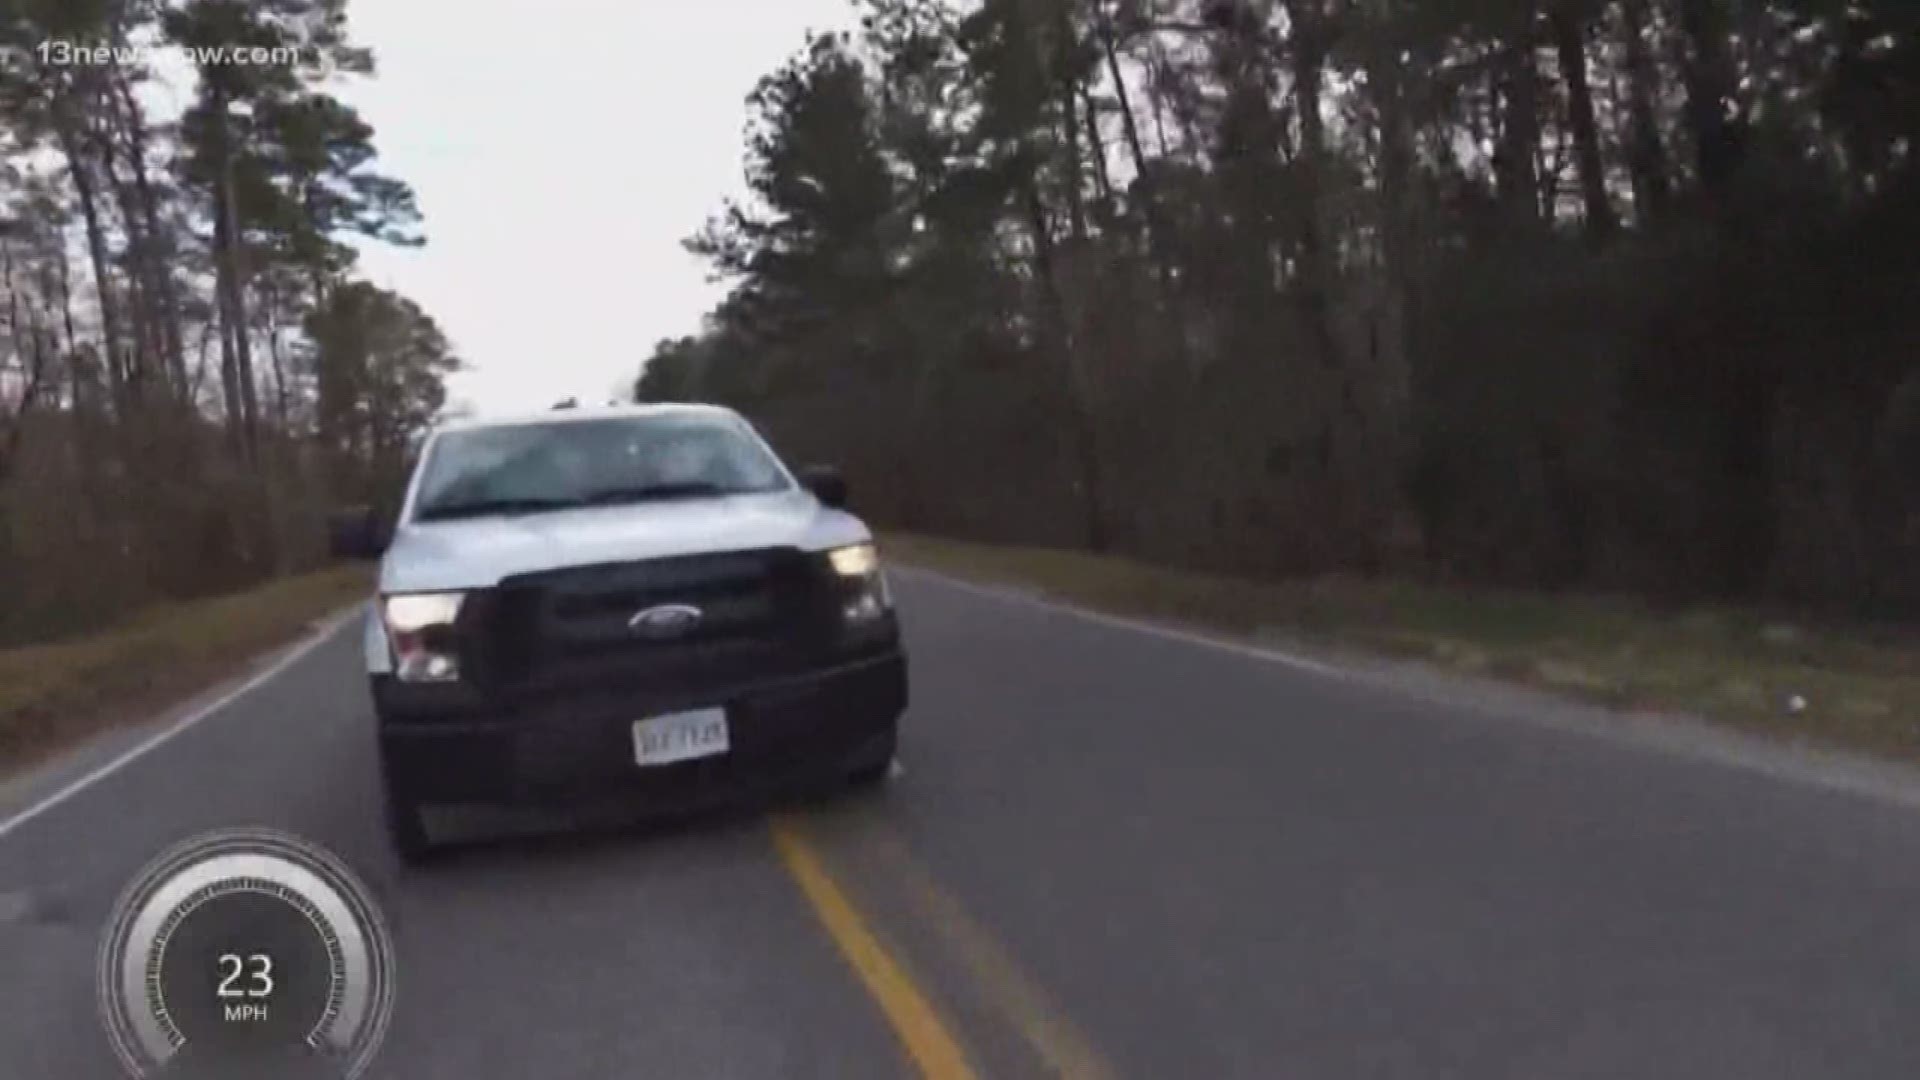 A cyclist in York County said a truck driver tried to intimidate him, possibly run him off the road and he caught the whole thing on video.